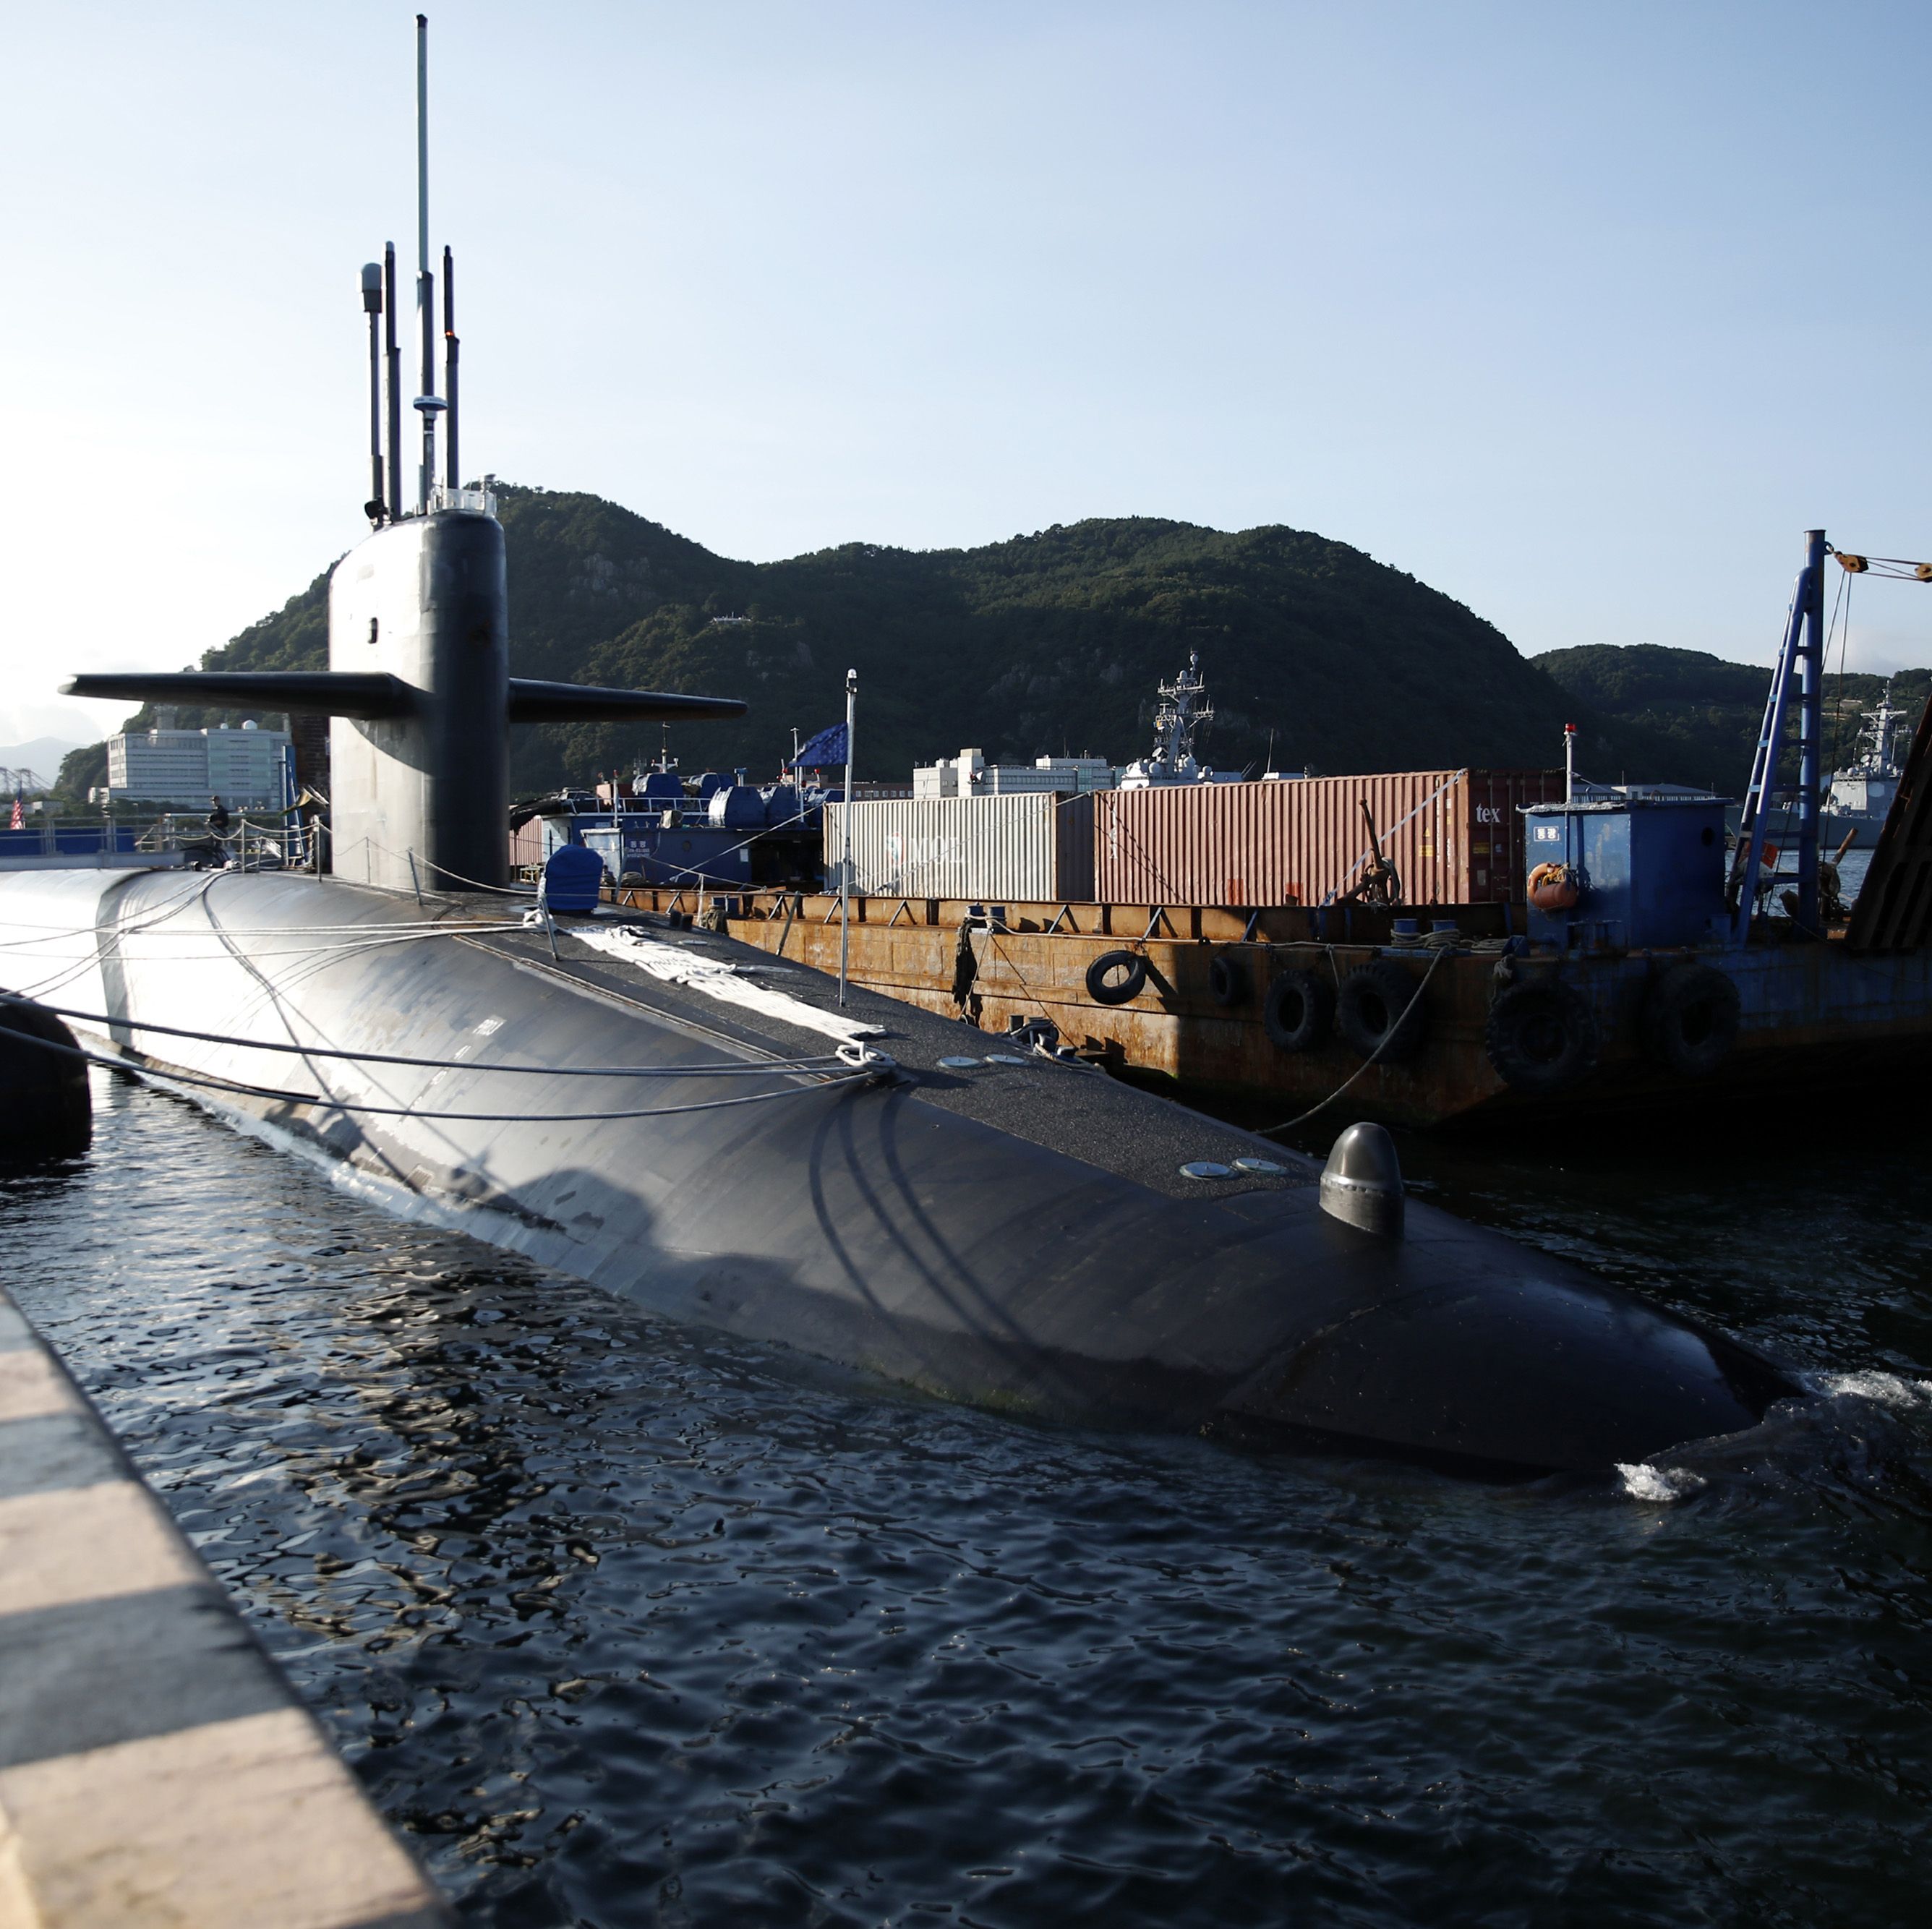 The U.S. Sent a Silent Submarine to South Korea. Naturally, North Korea Freaked Out.